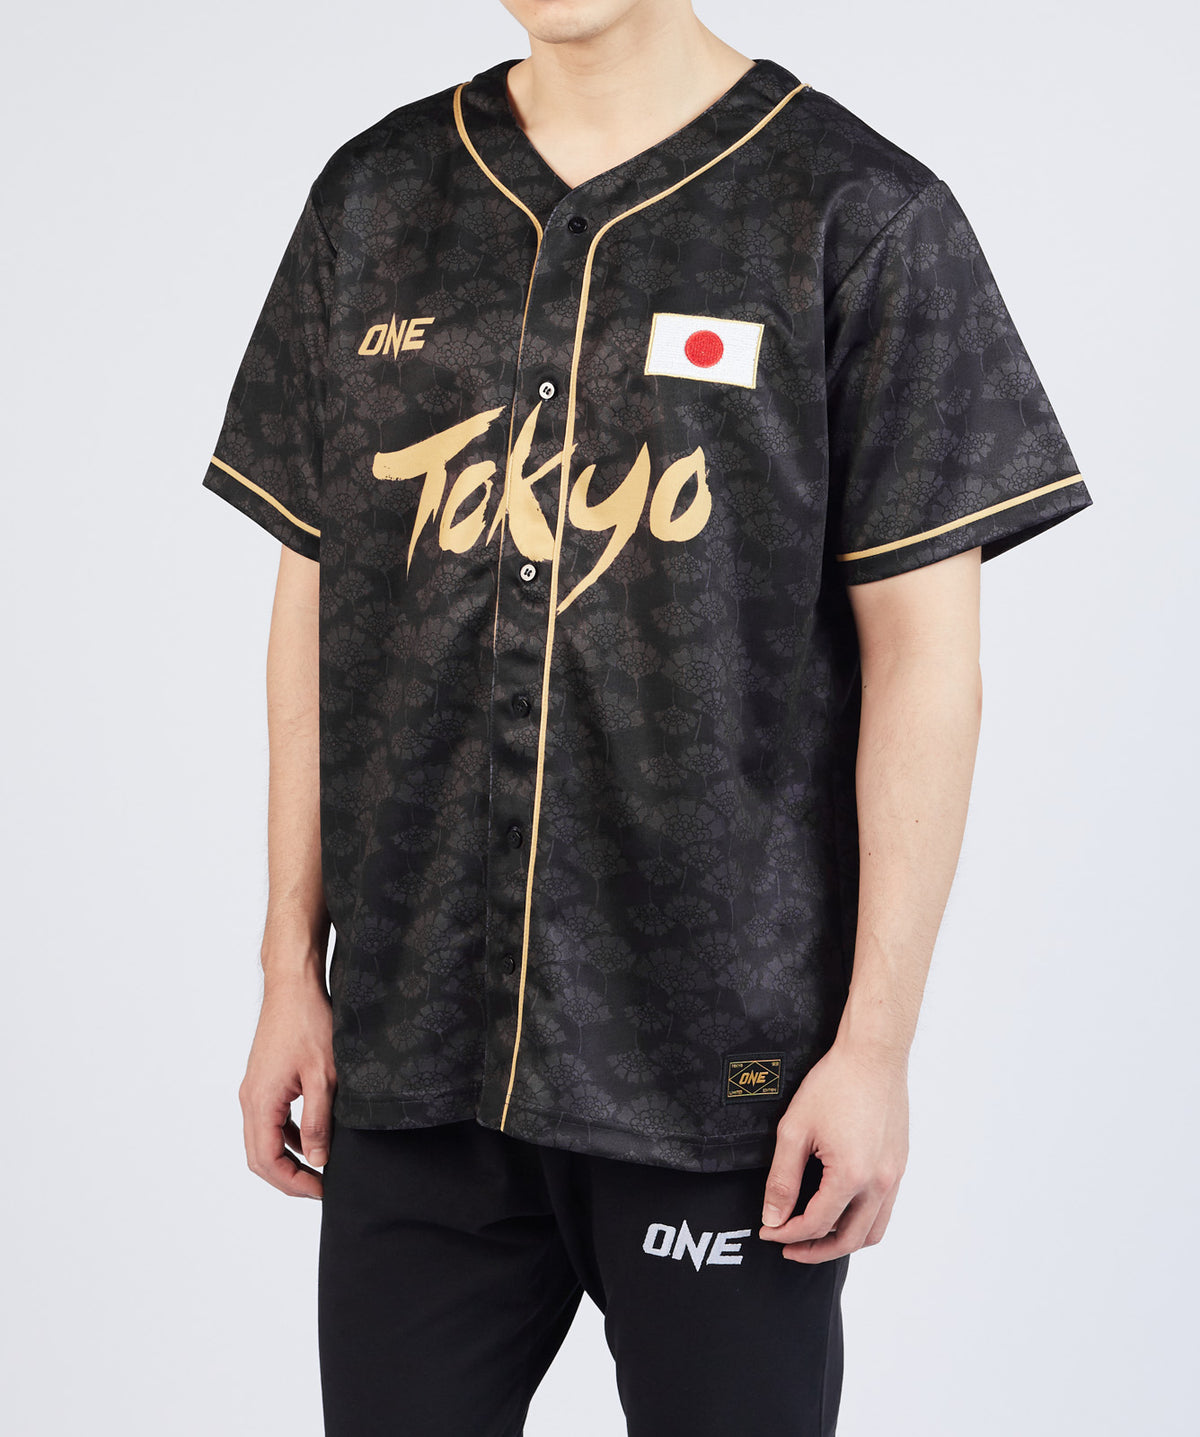 ONE Tokyo Baseball Jersey - ONE.SHOP | The Official Online Shop of ONE Championship